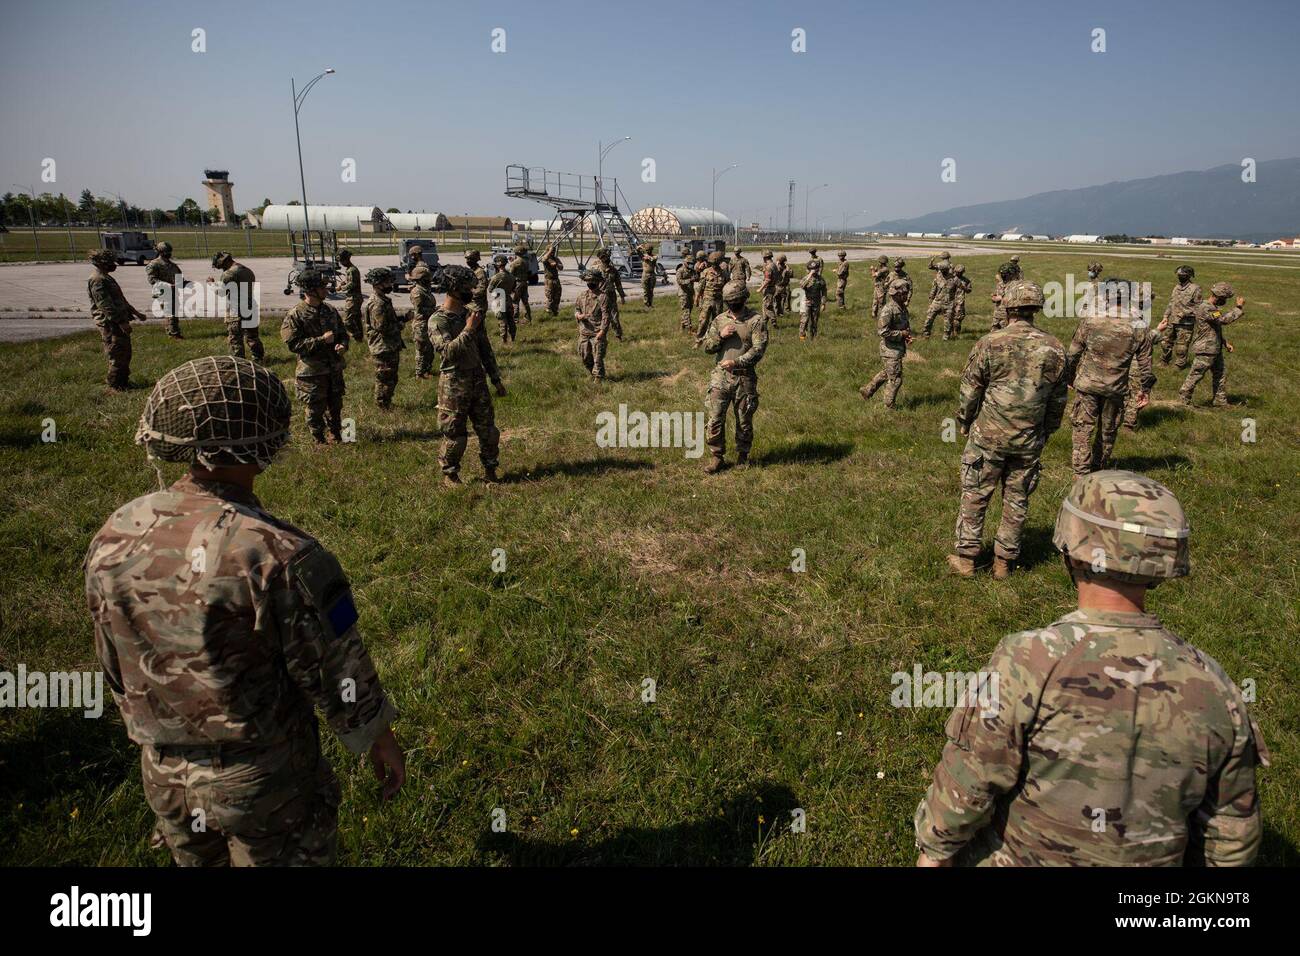 U.S. Army Soldiers assigned to U.S. Army Southern European Task Force, Africa, and the 2nd Battalion,503rd Infantry Regiment, 173rd Airborne Brigade, conduct sustained airborne training with their British counterparts at the Aviano Air Base in Aviano, Italy, June 3, 2021. African Lion 2021 is U.S. Africa Command's largest, premier, joint, annual exercise hosted by Morocco, Tunisia, and Senegal, 7-18 June. More than 7,00 participants from nine nations and NATO train together with a focus on enhancing readiness for U.S. and partner nation forces. AL21 is multi-domain, multi-component, and multin Stock Photo